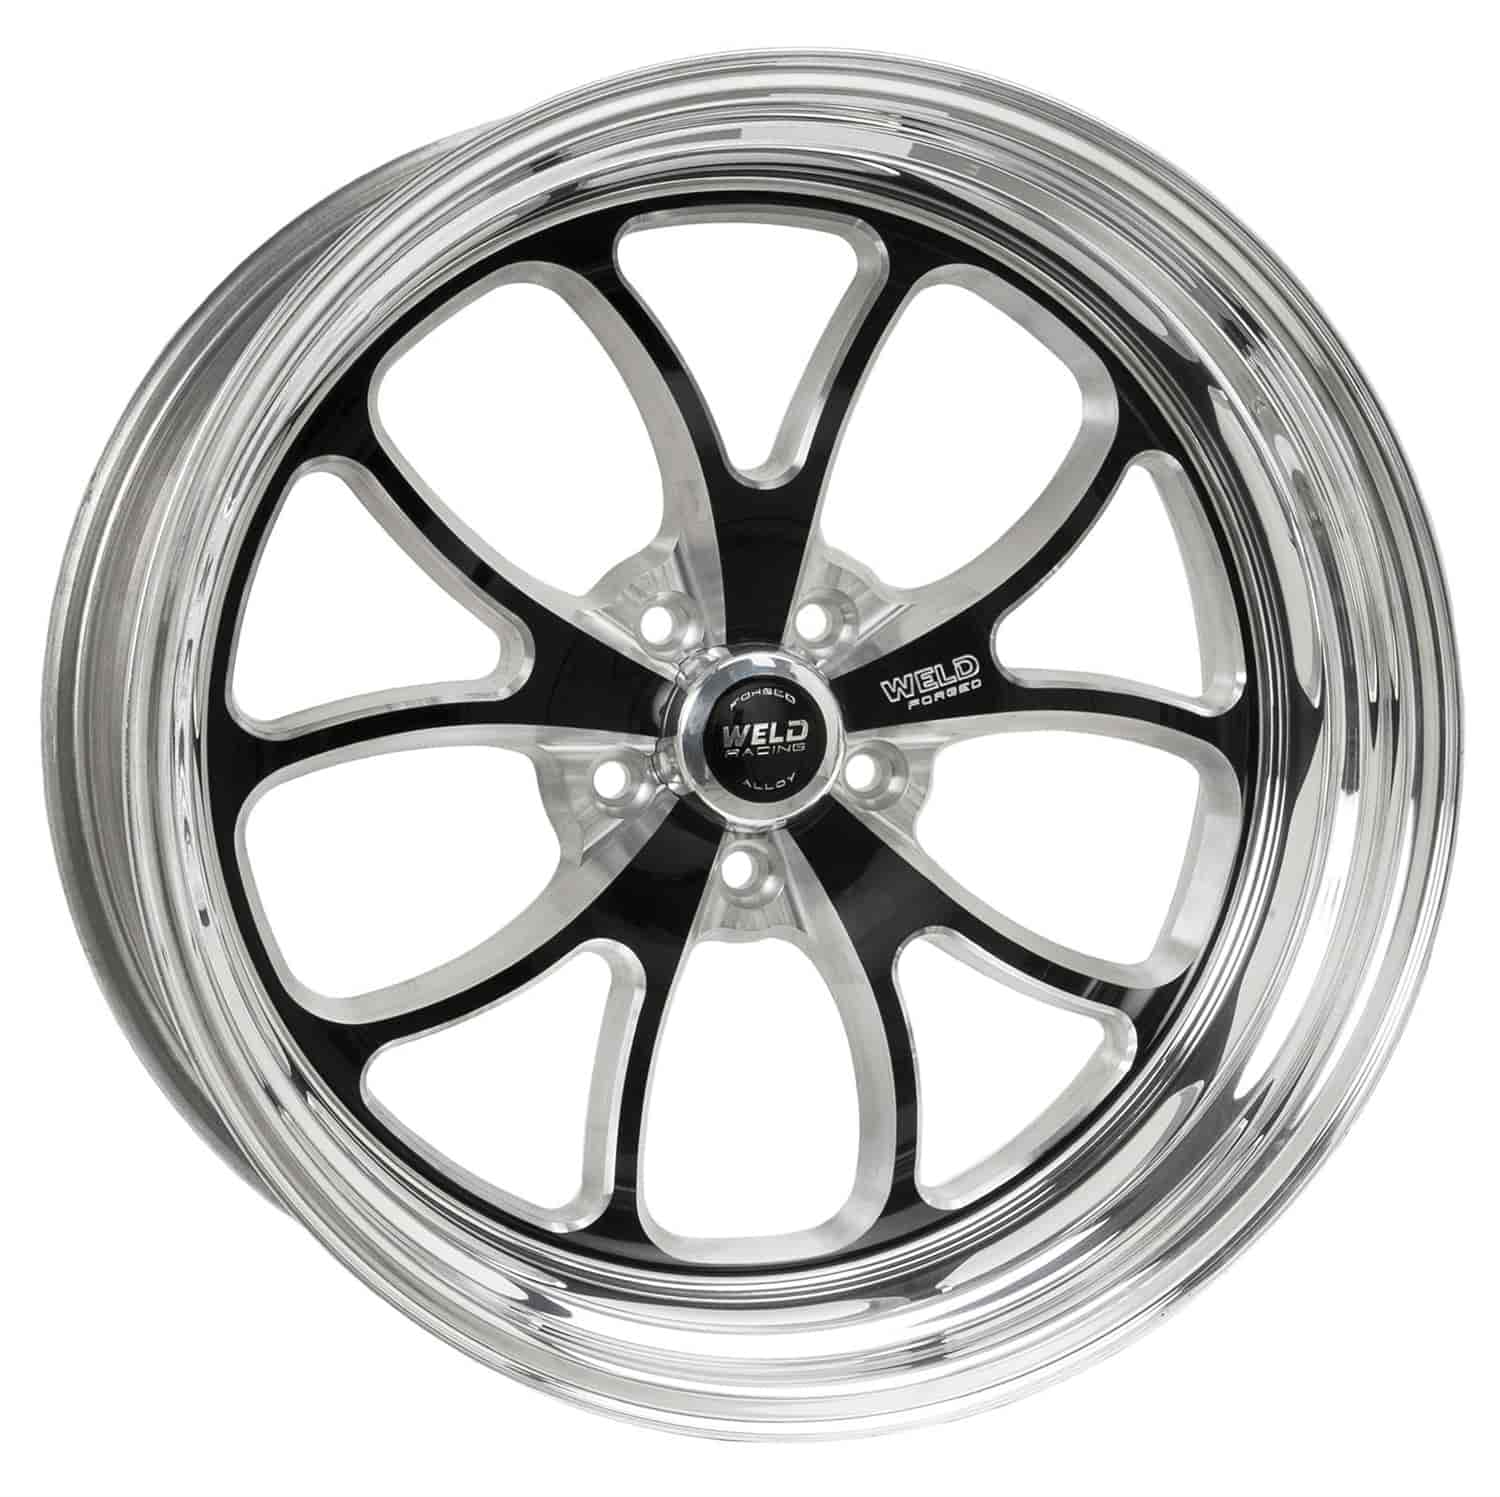 15X10 S76 Blk Ctr 5X4.75 7.5BS 50mm O/S